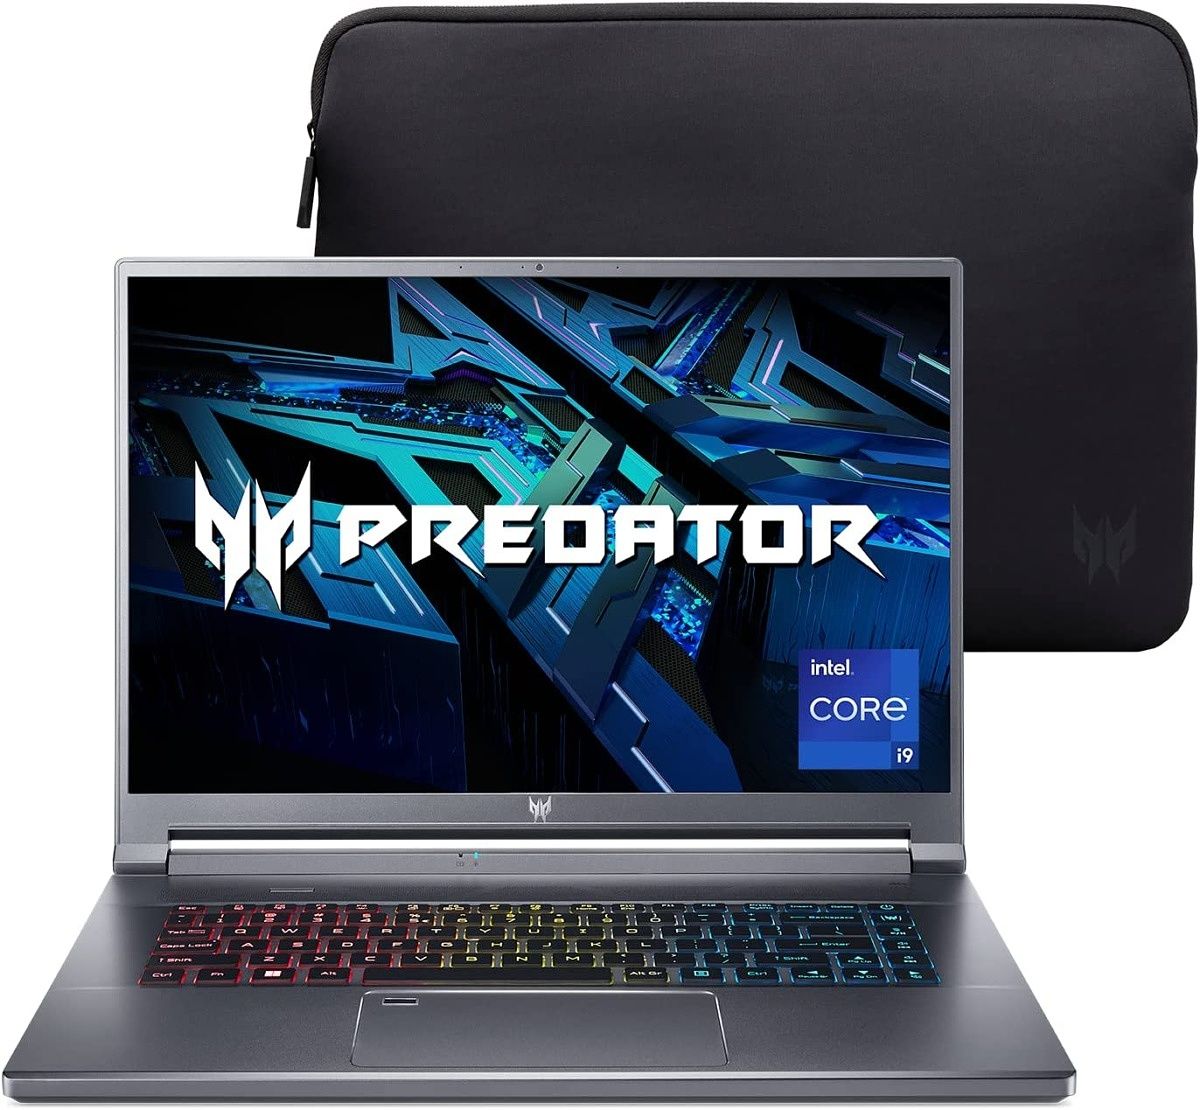 The Acer Predator Triton 500 SE is a seriously powerful laptop with an Intel Core i9 CPU, and RTX 3080Ti graphics.